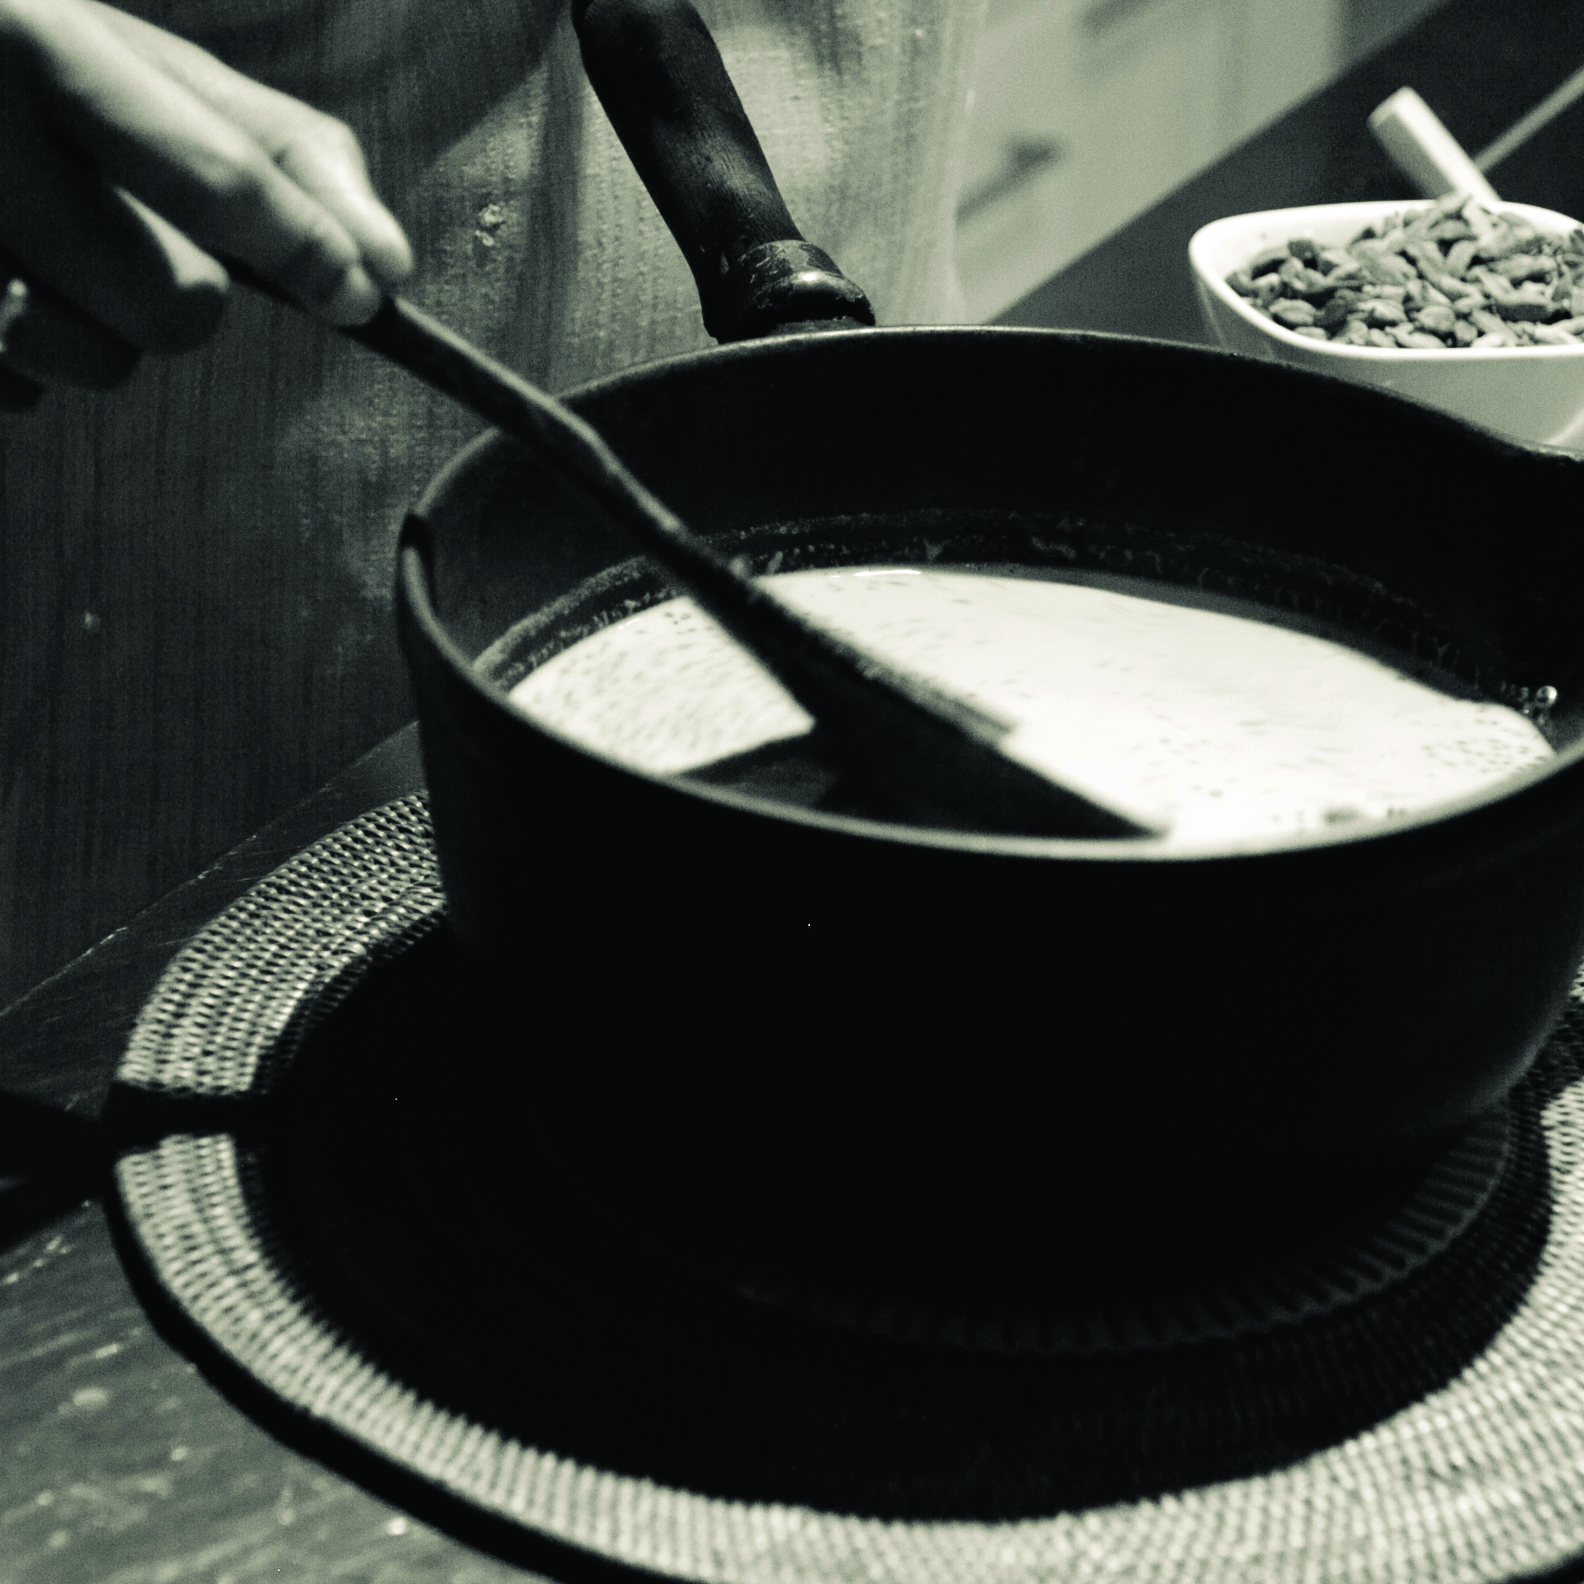 A black and white photo of a cast iron cauldron with milk in it, and someone stirring